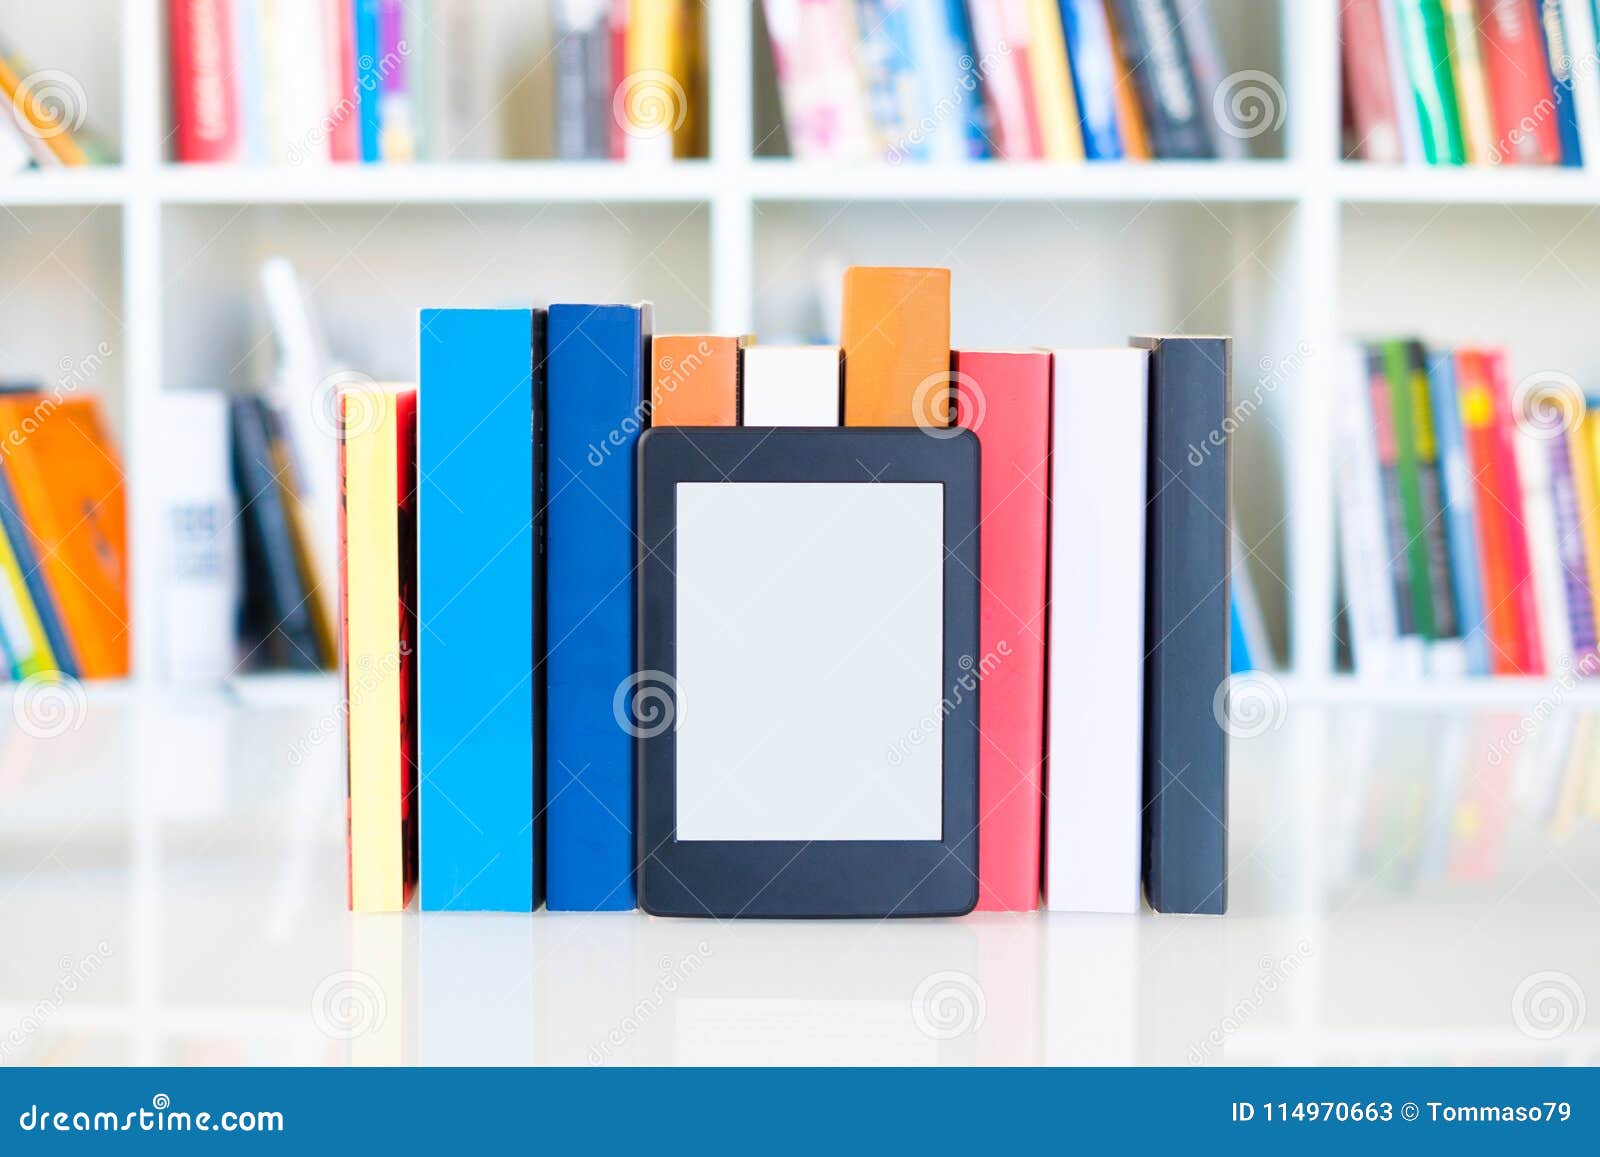 Internet And Electronic Books Concept With E Book Reader Stock